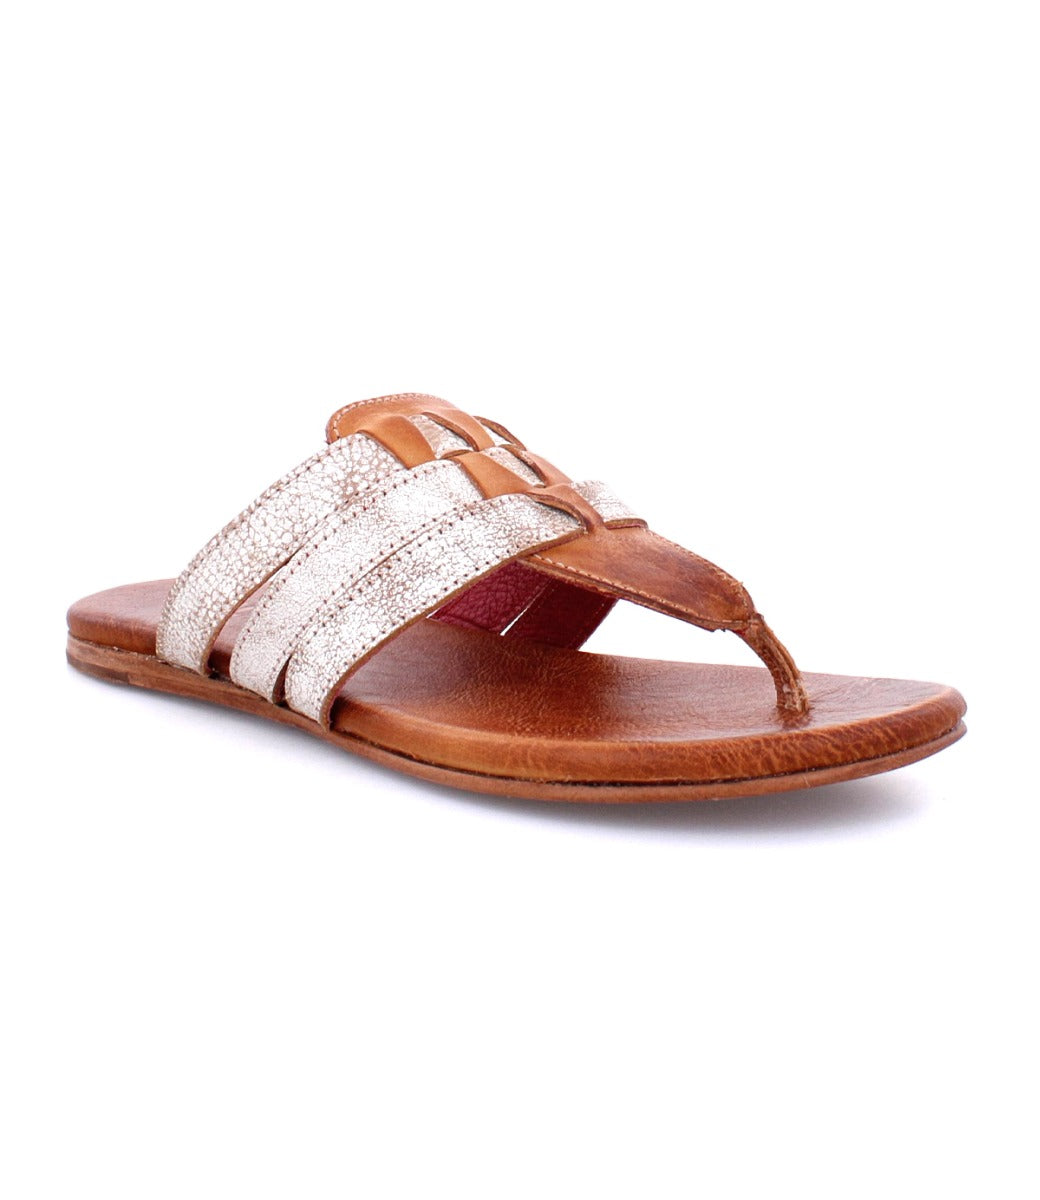 A Yoli sandal with tan and white straps from Bed Stu.